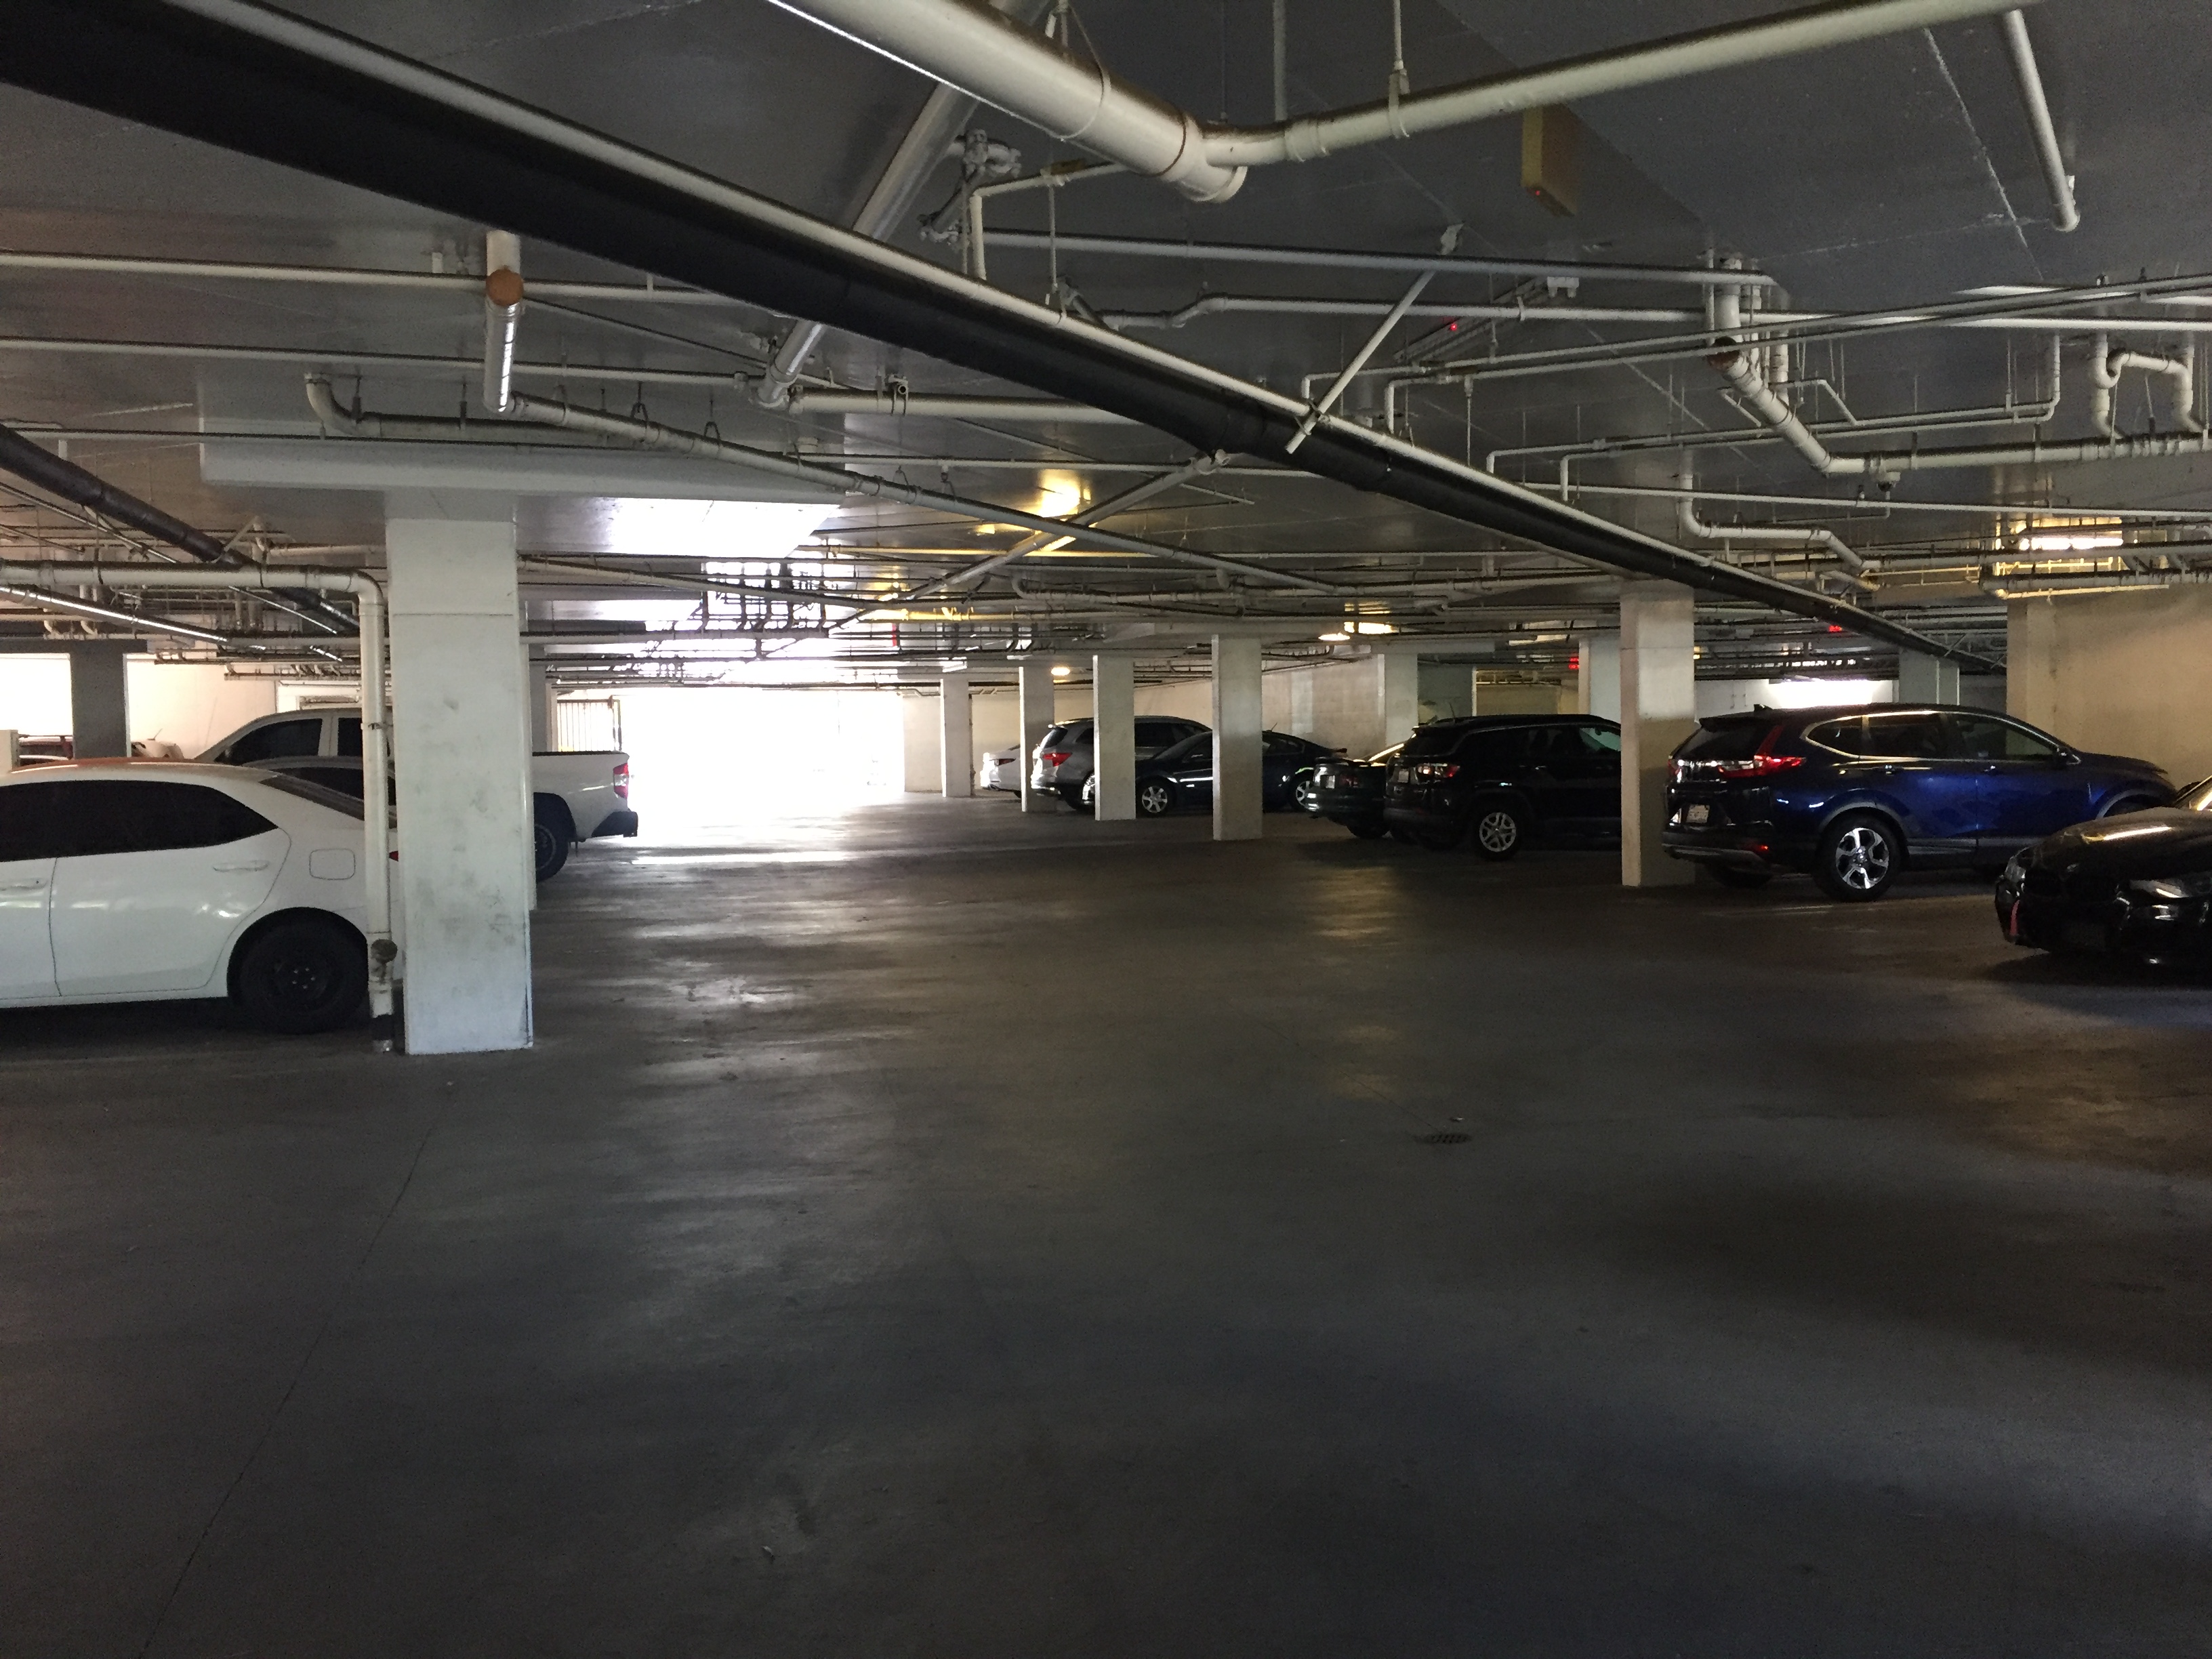 View of a covered parking lot. There are piped on the ceiling.